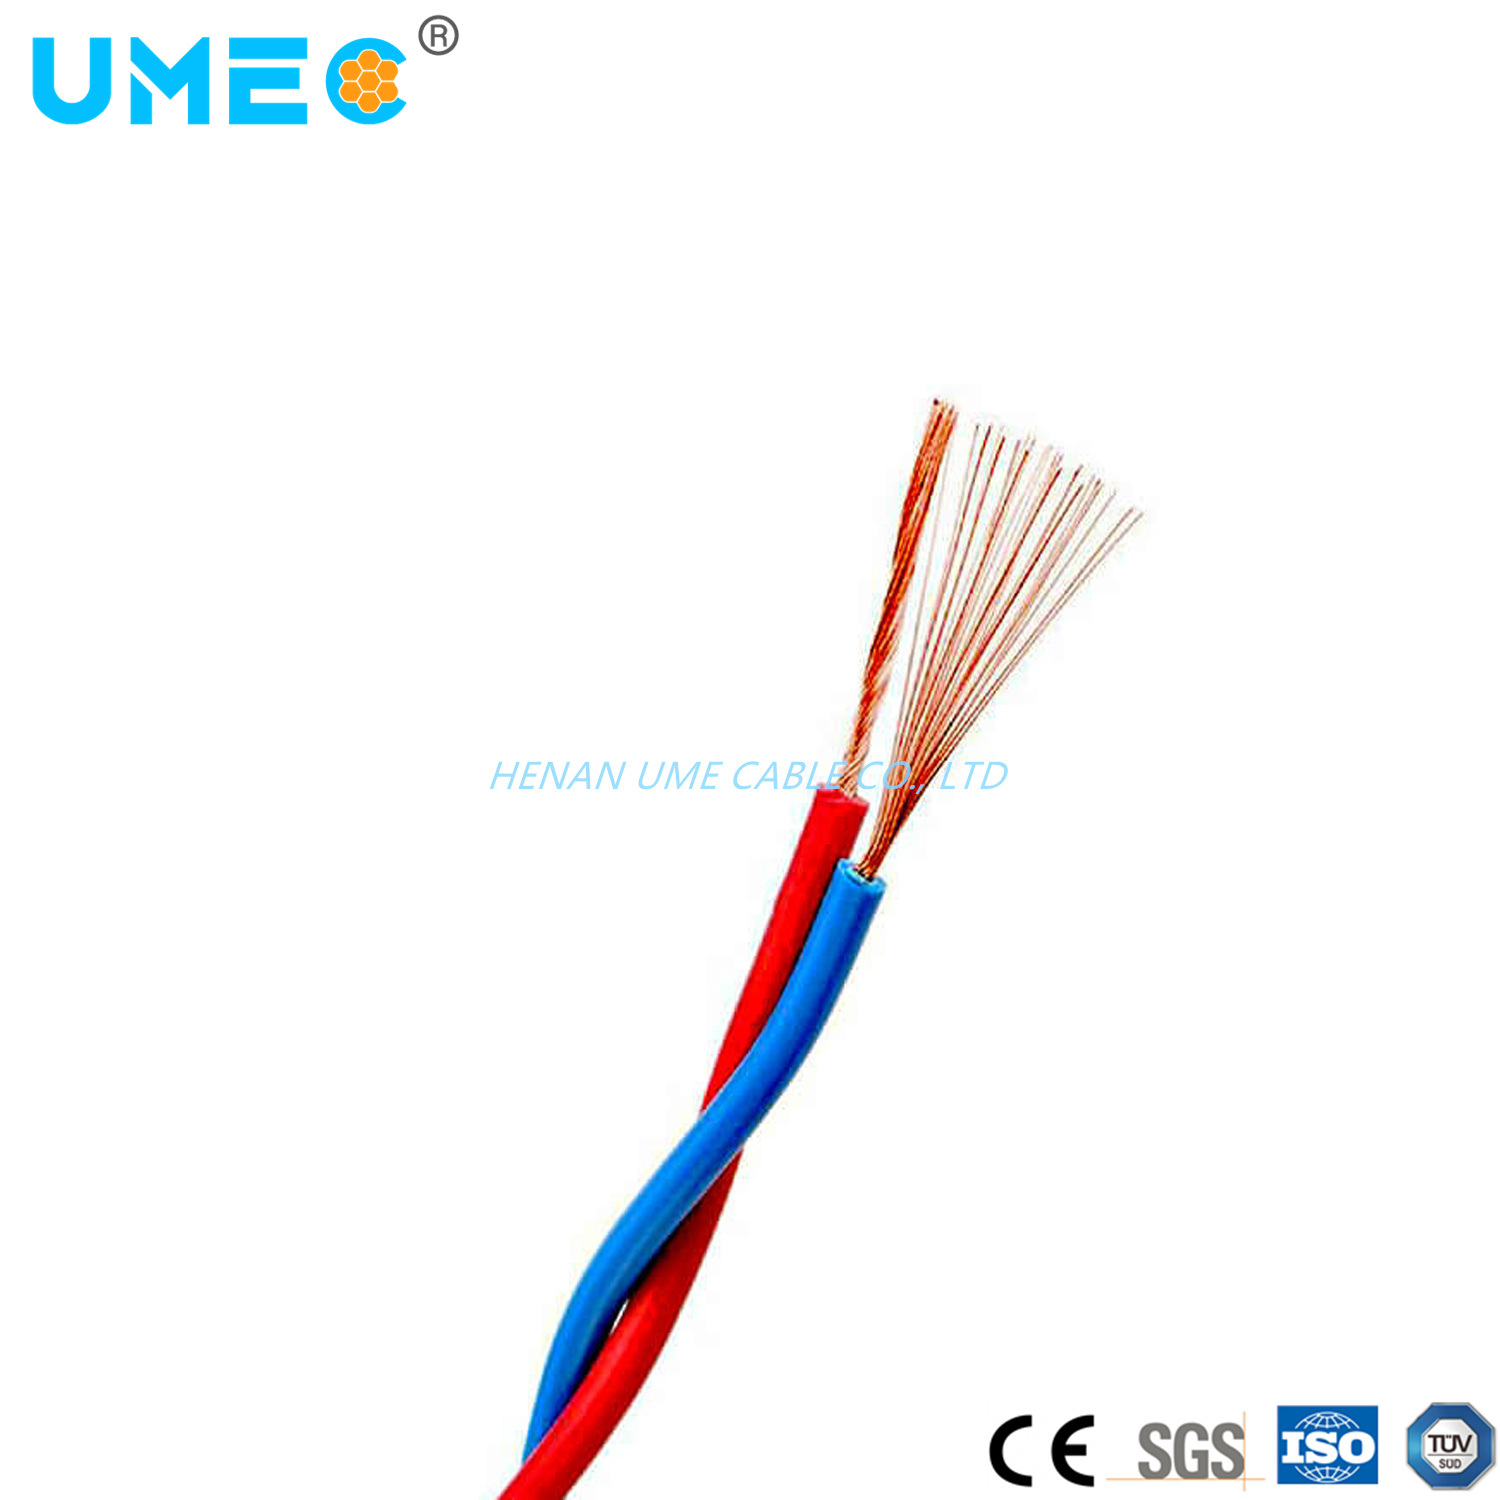 China Factory 0.75 1.0 1.5 2.5mm Rvs PVC Insulated Flexible Cable 2 Core Twisted Pair Electric Wires Copper Conductor Cable Wire Price